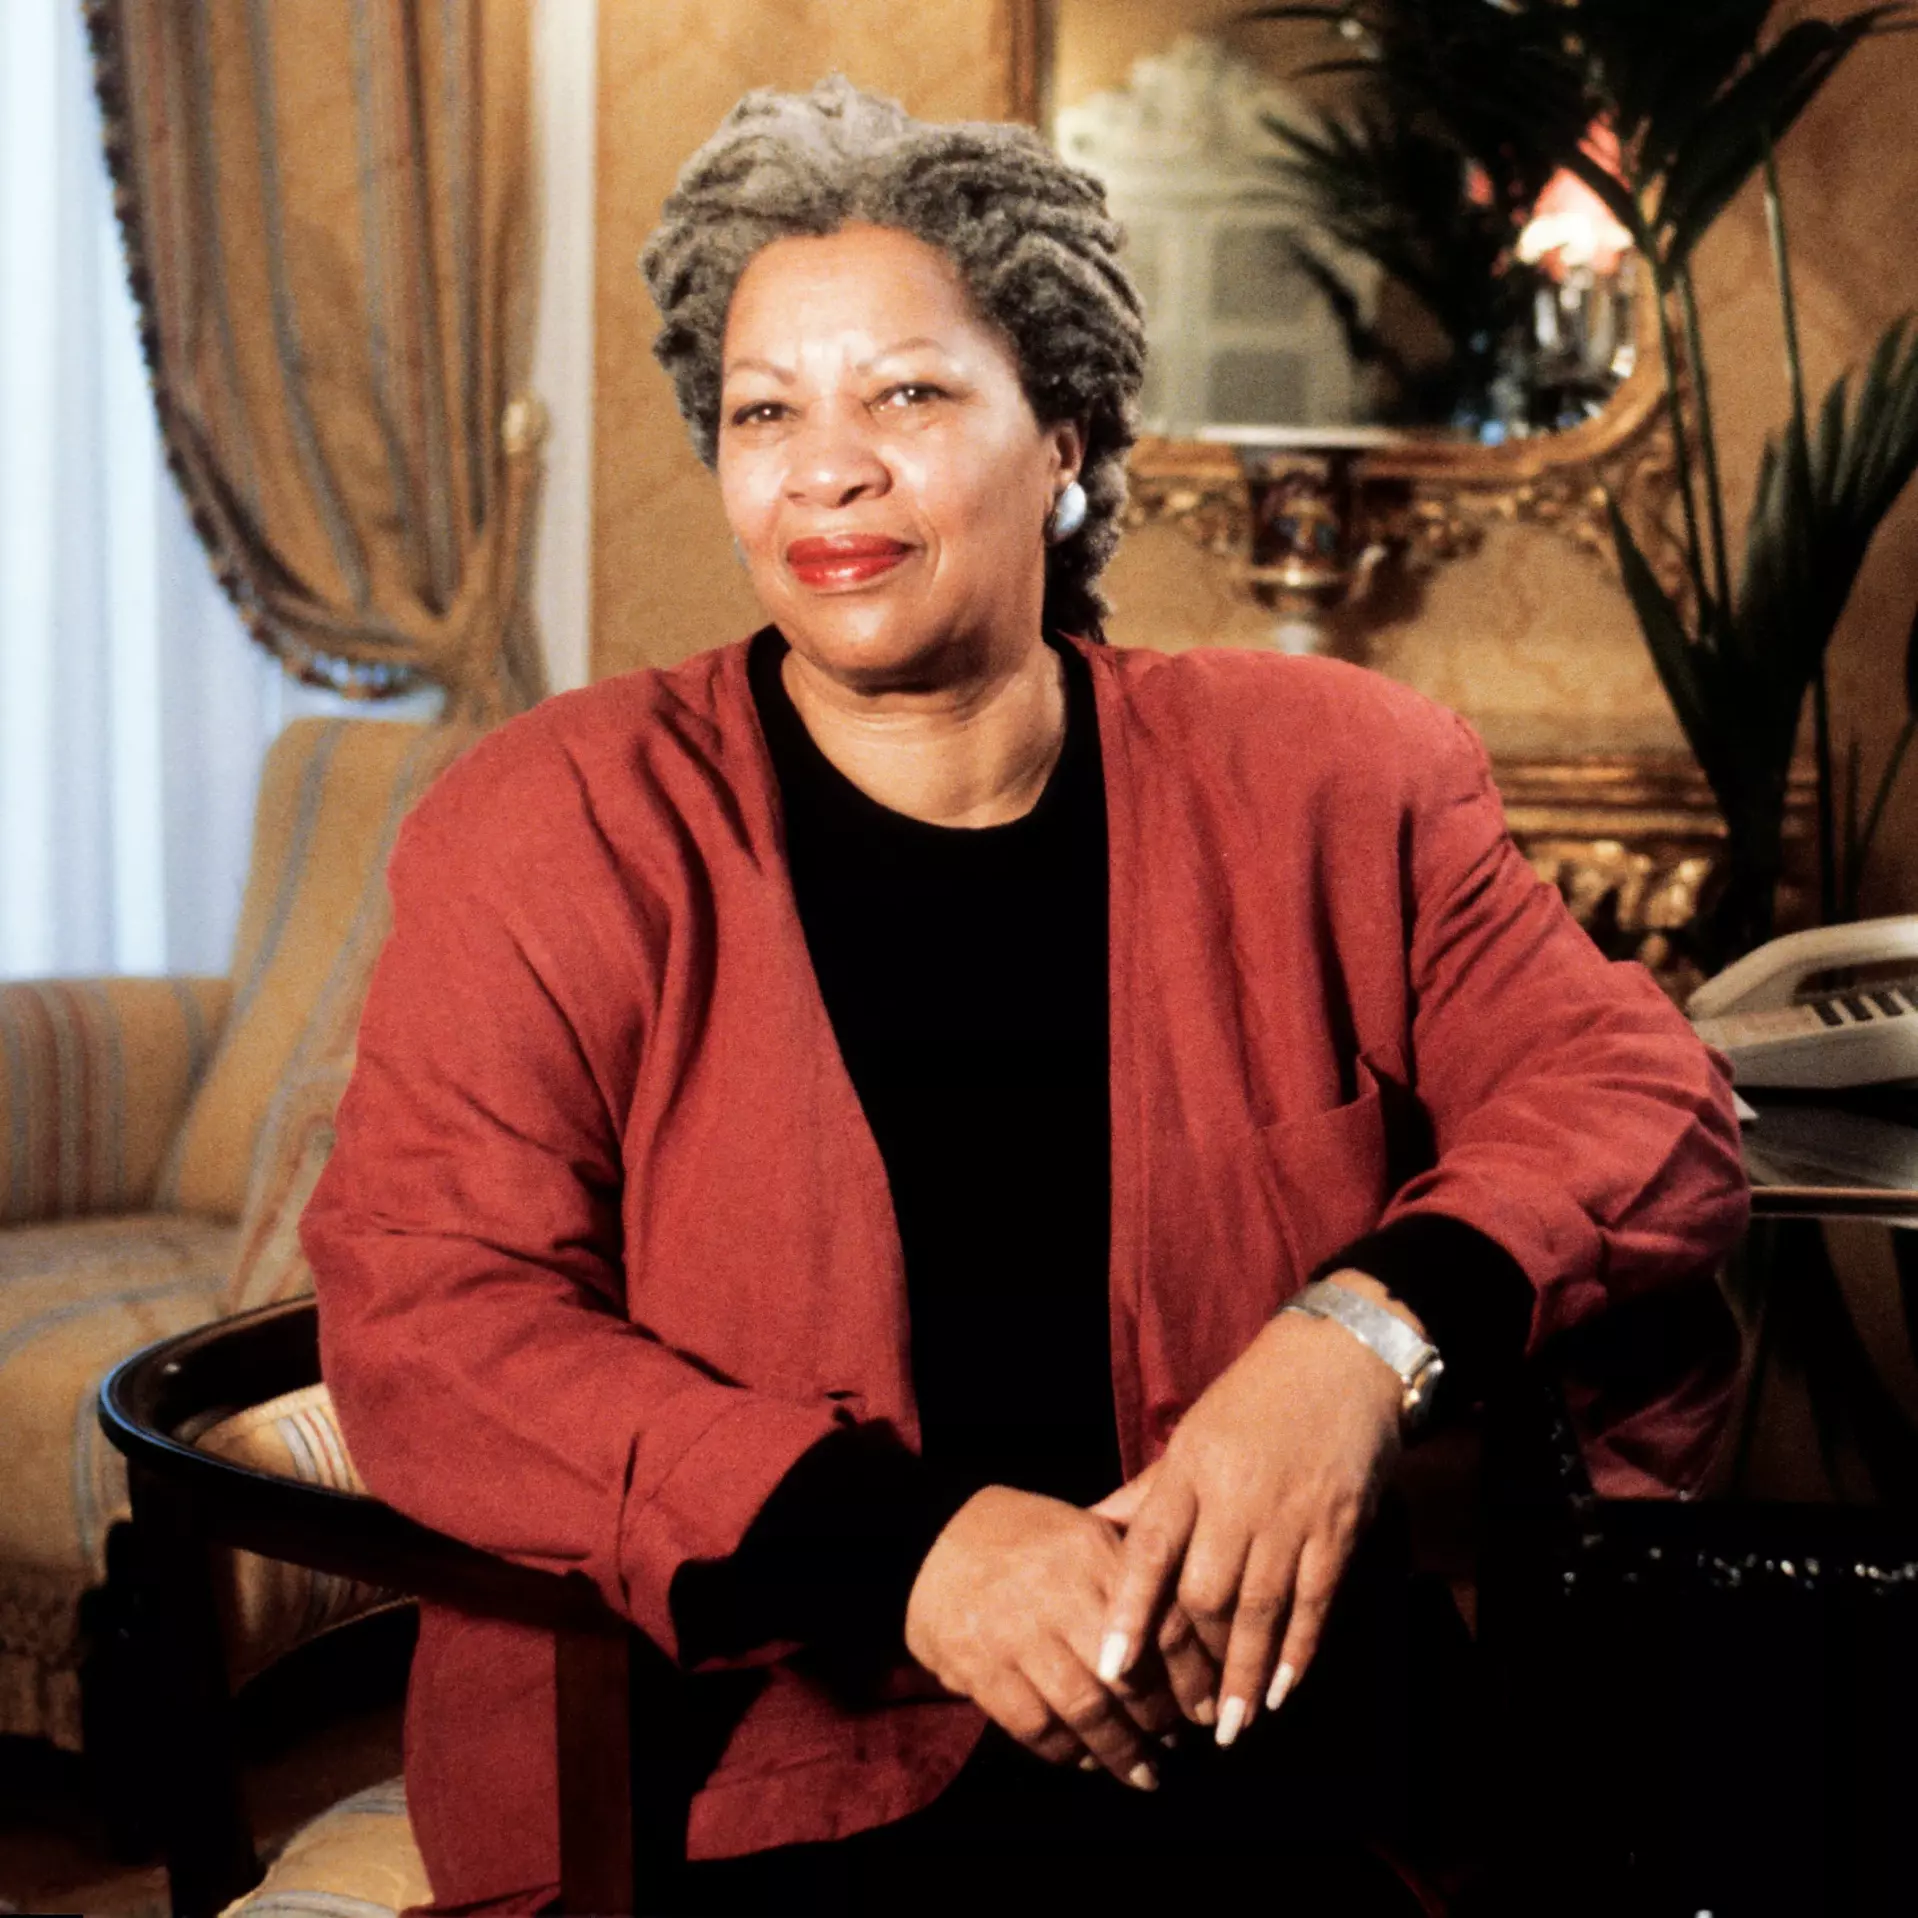 What awards and achievements did Toni Morrison receive?